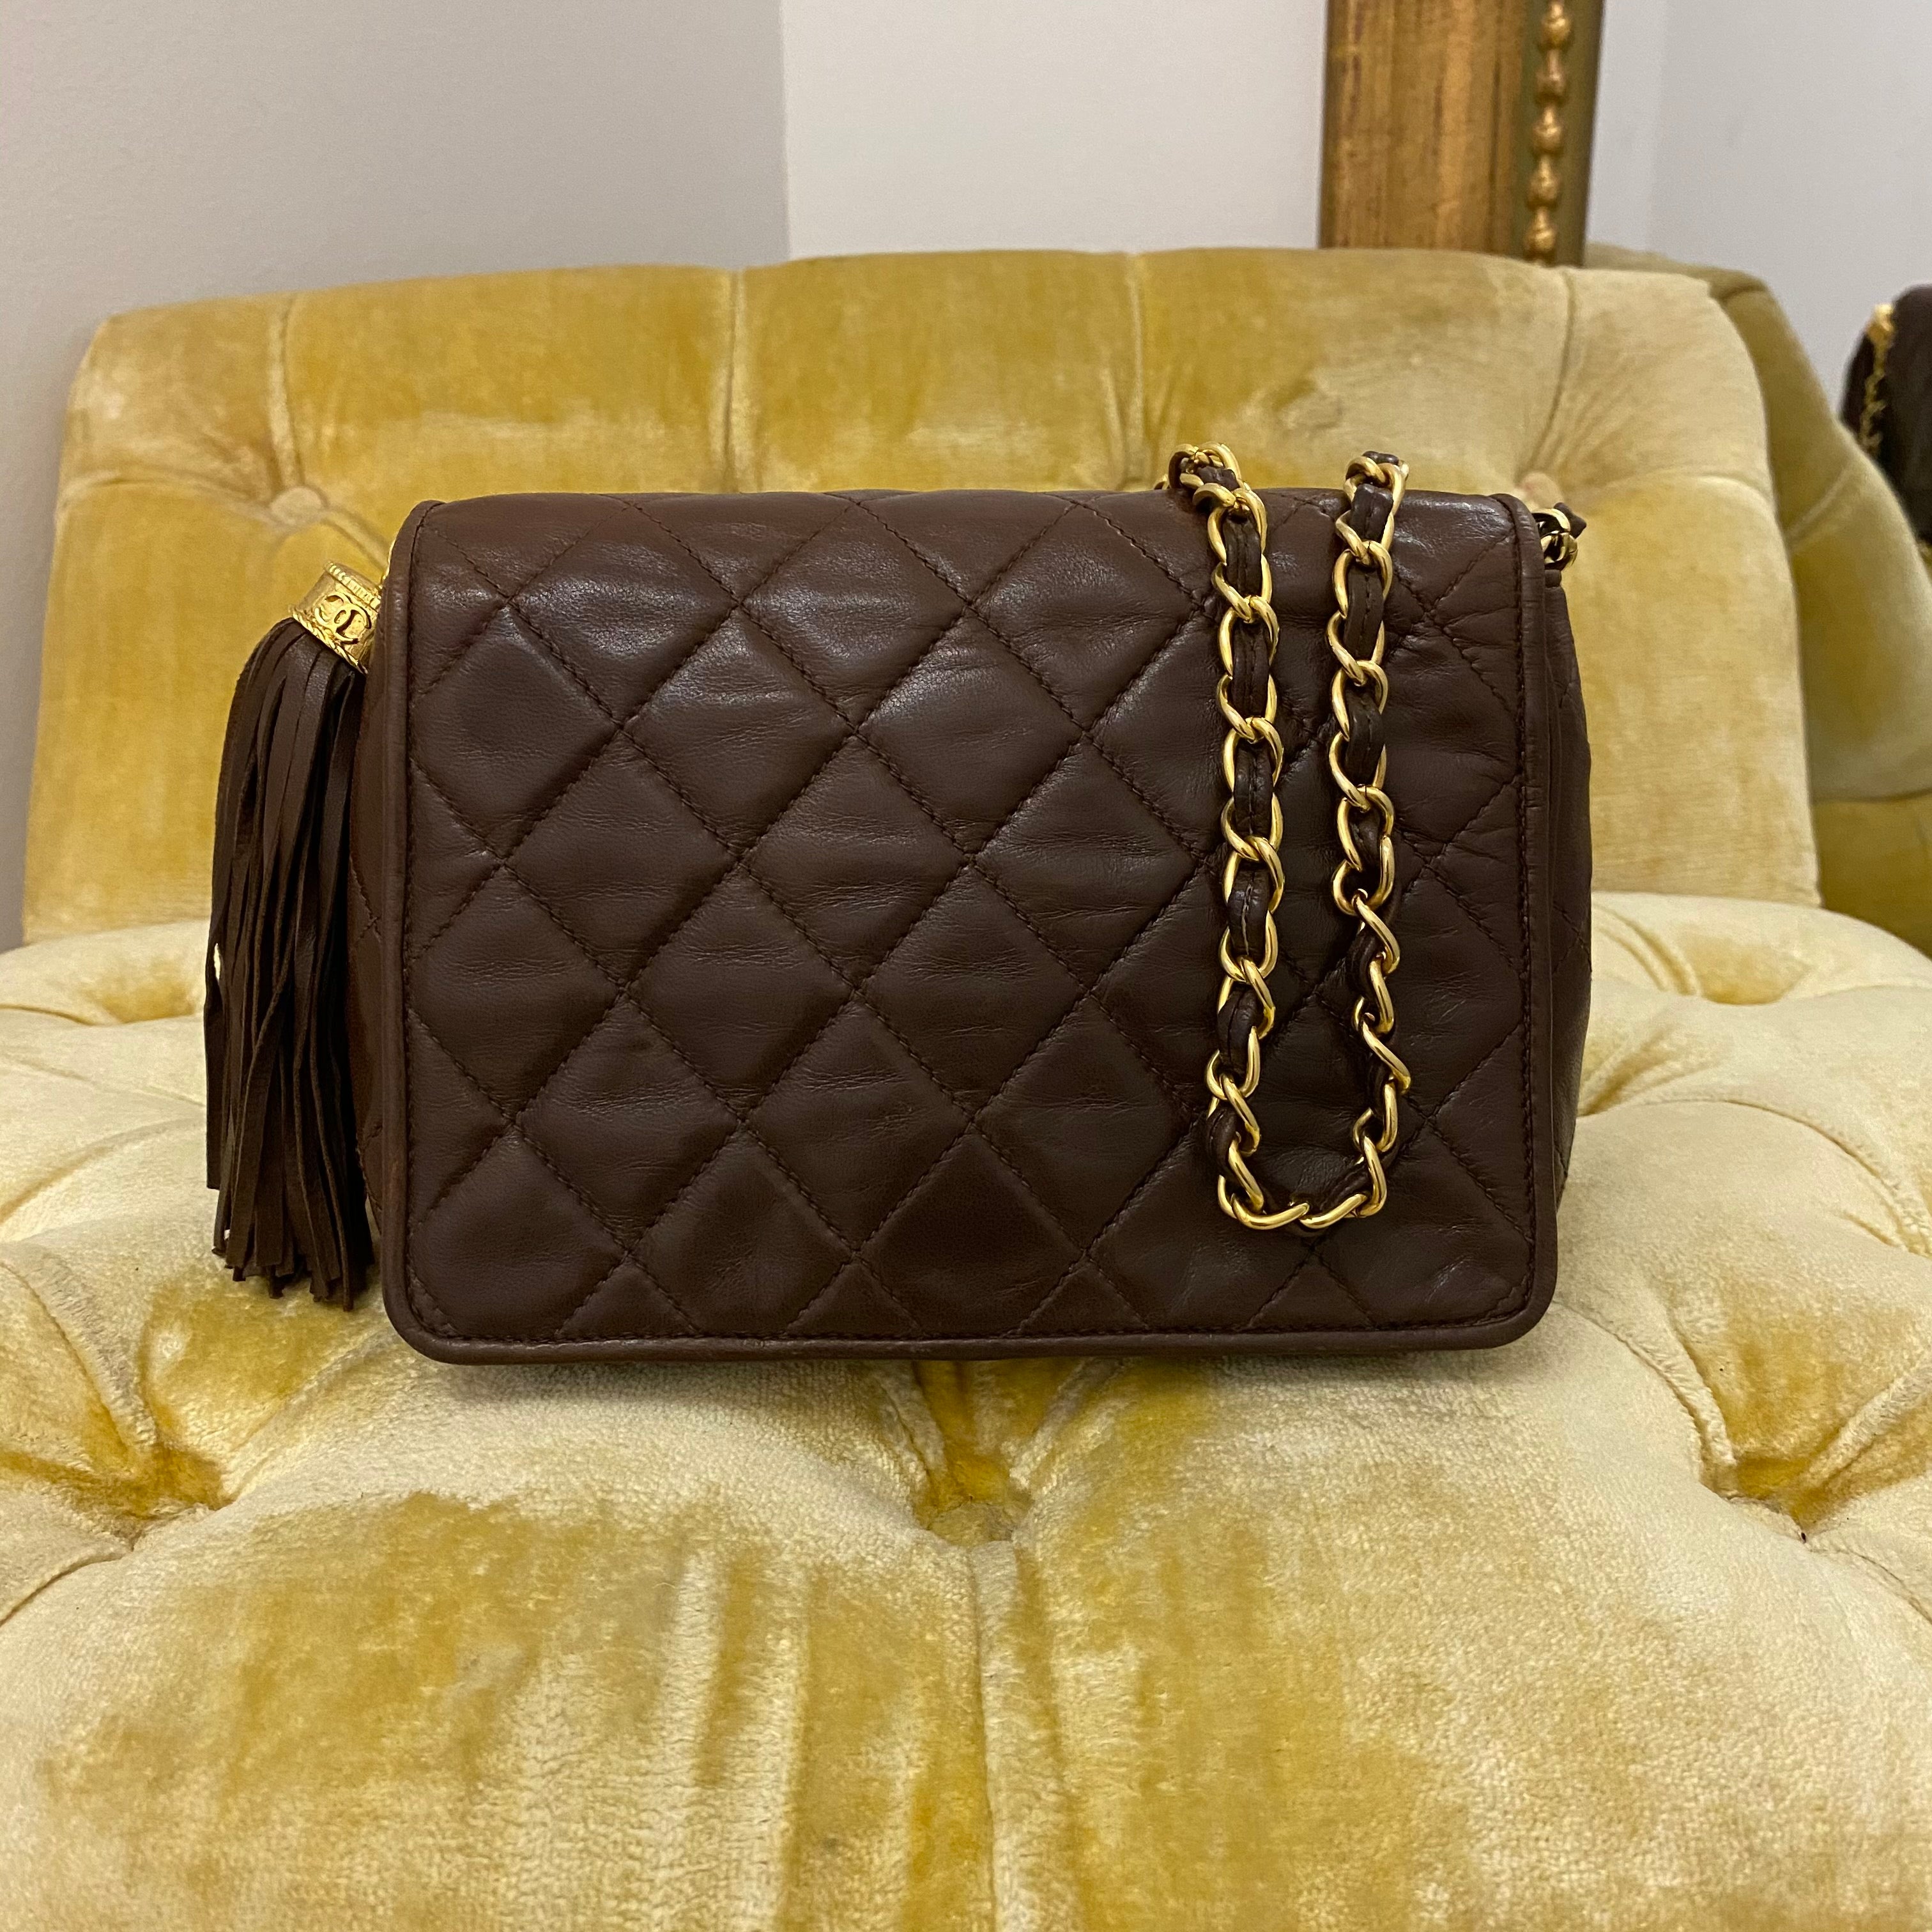 Byrd Designer Consignment on Instagram: CHANEL // Wool Chocolate Bar Flap  Bag $1,495 💜💜💜 Shop now at www.byrdstyle.com Byrd Designer Consignment  is a reseller of authentic preowned items and is not affiliated